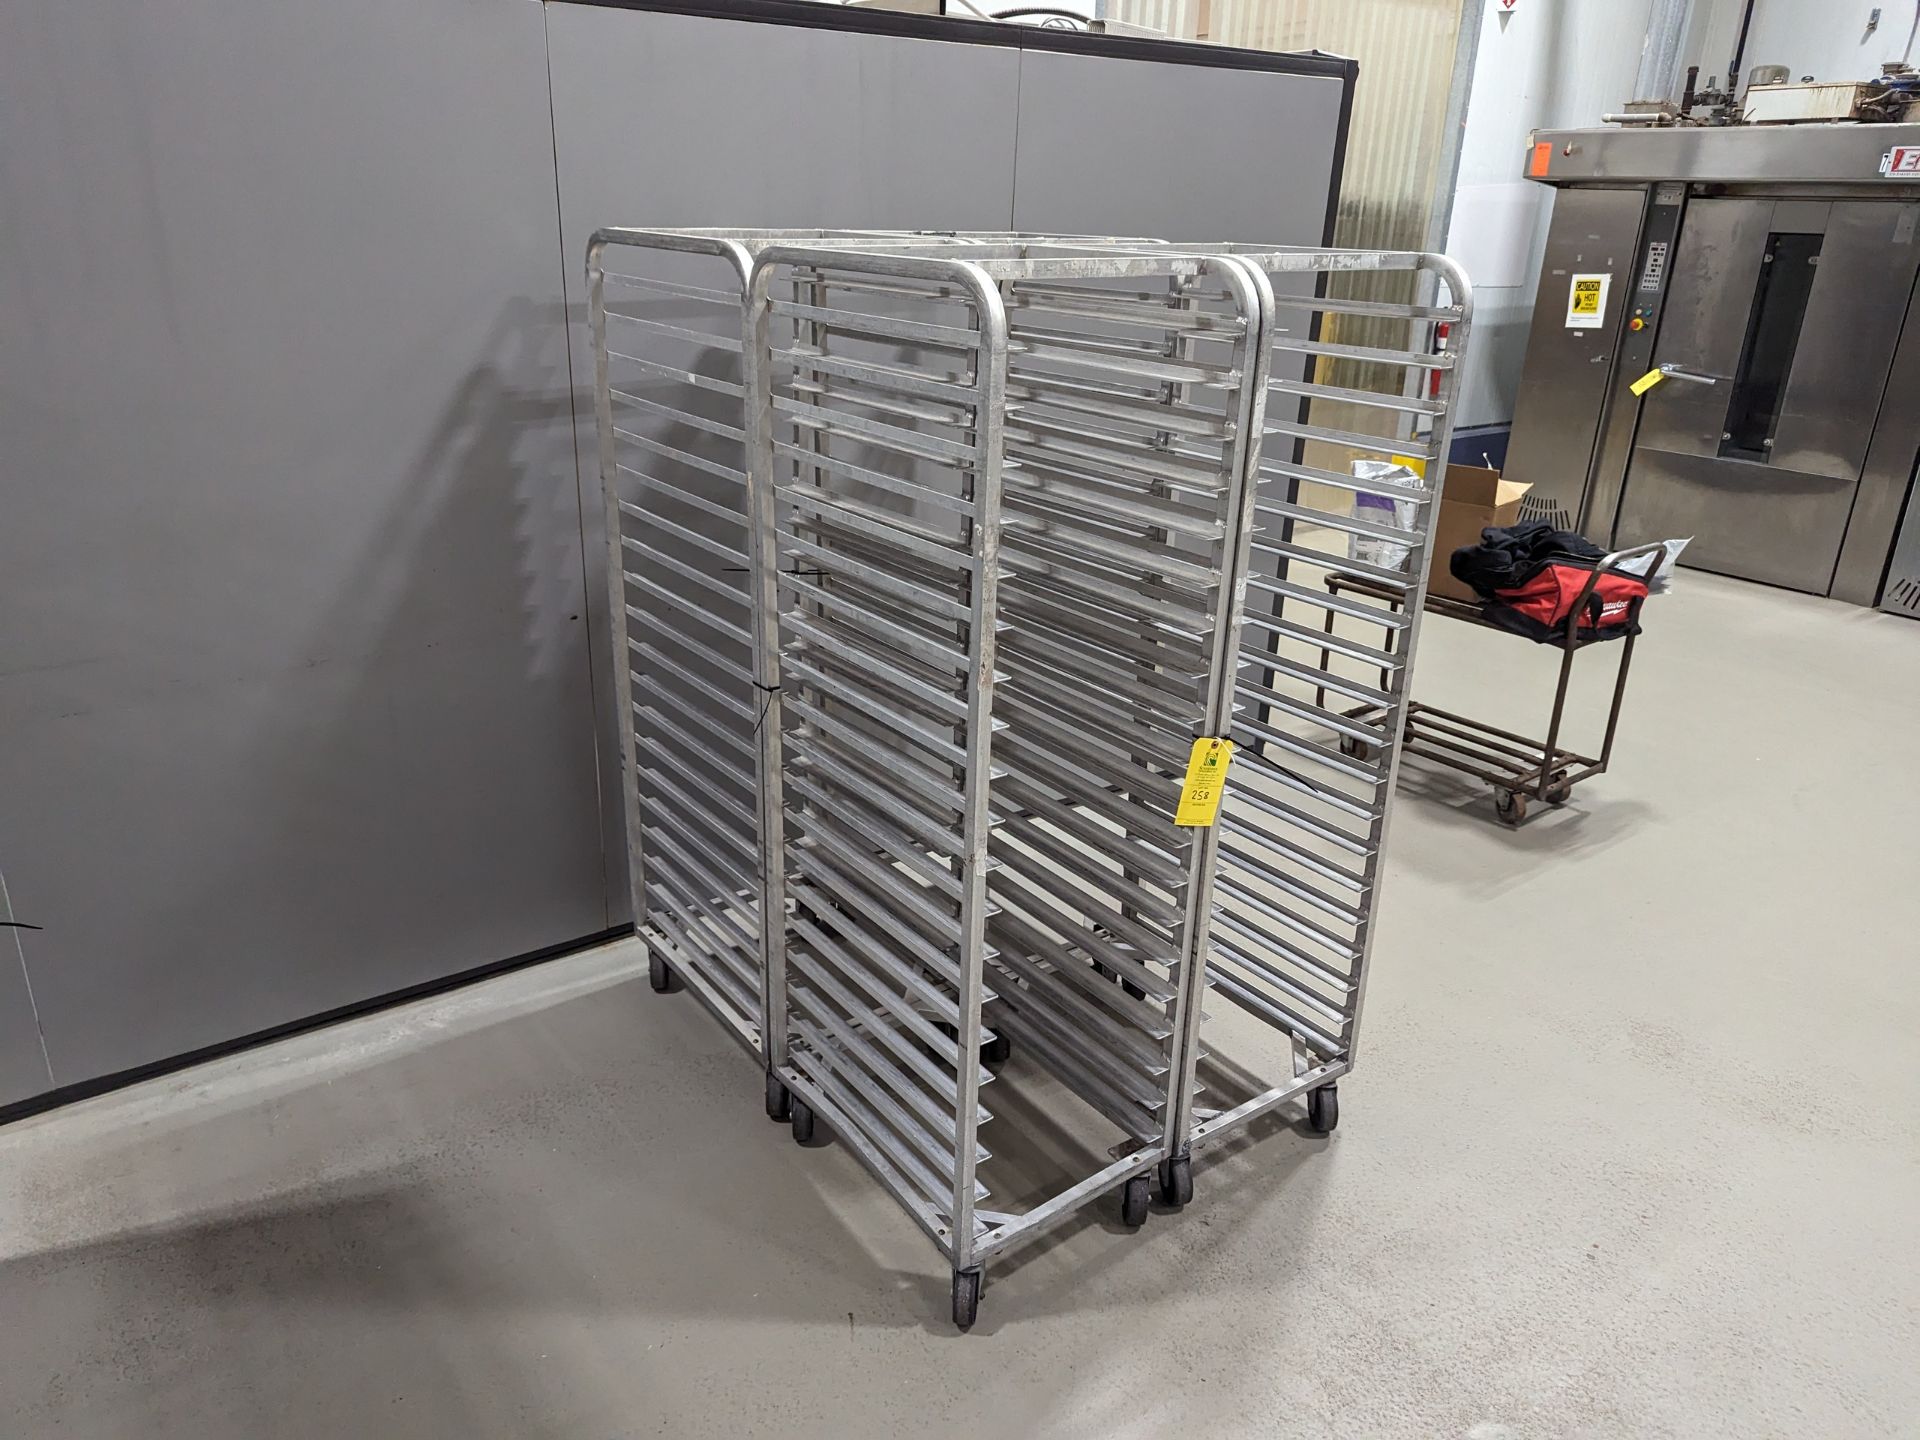 Lot of 4 Single Wide Aluminum Bakery Racks, Dimensions LxWxH: 53x41x69 Measurements are for lot of - Image 3 of 6